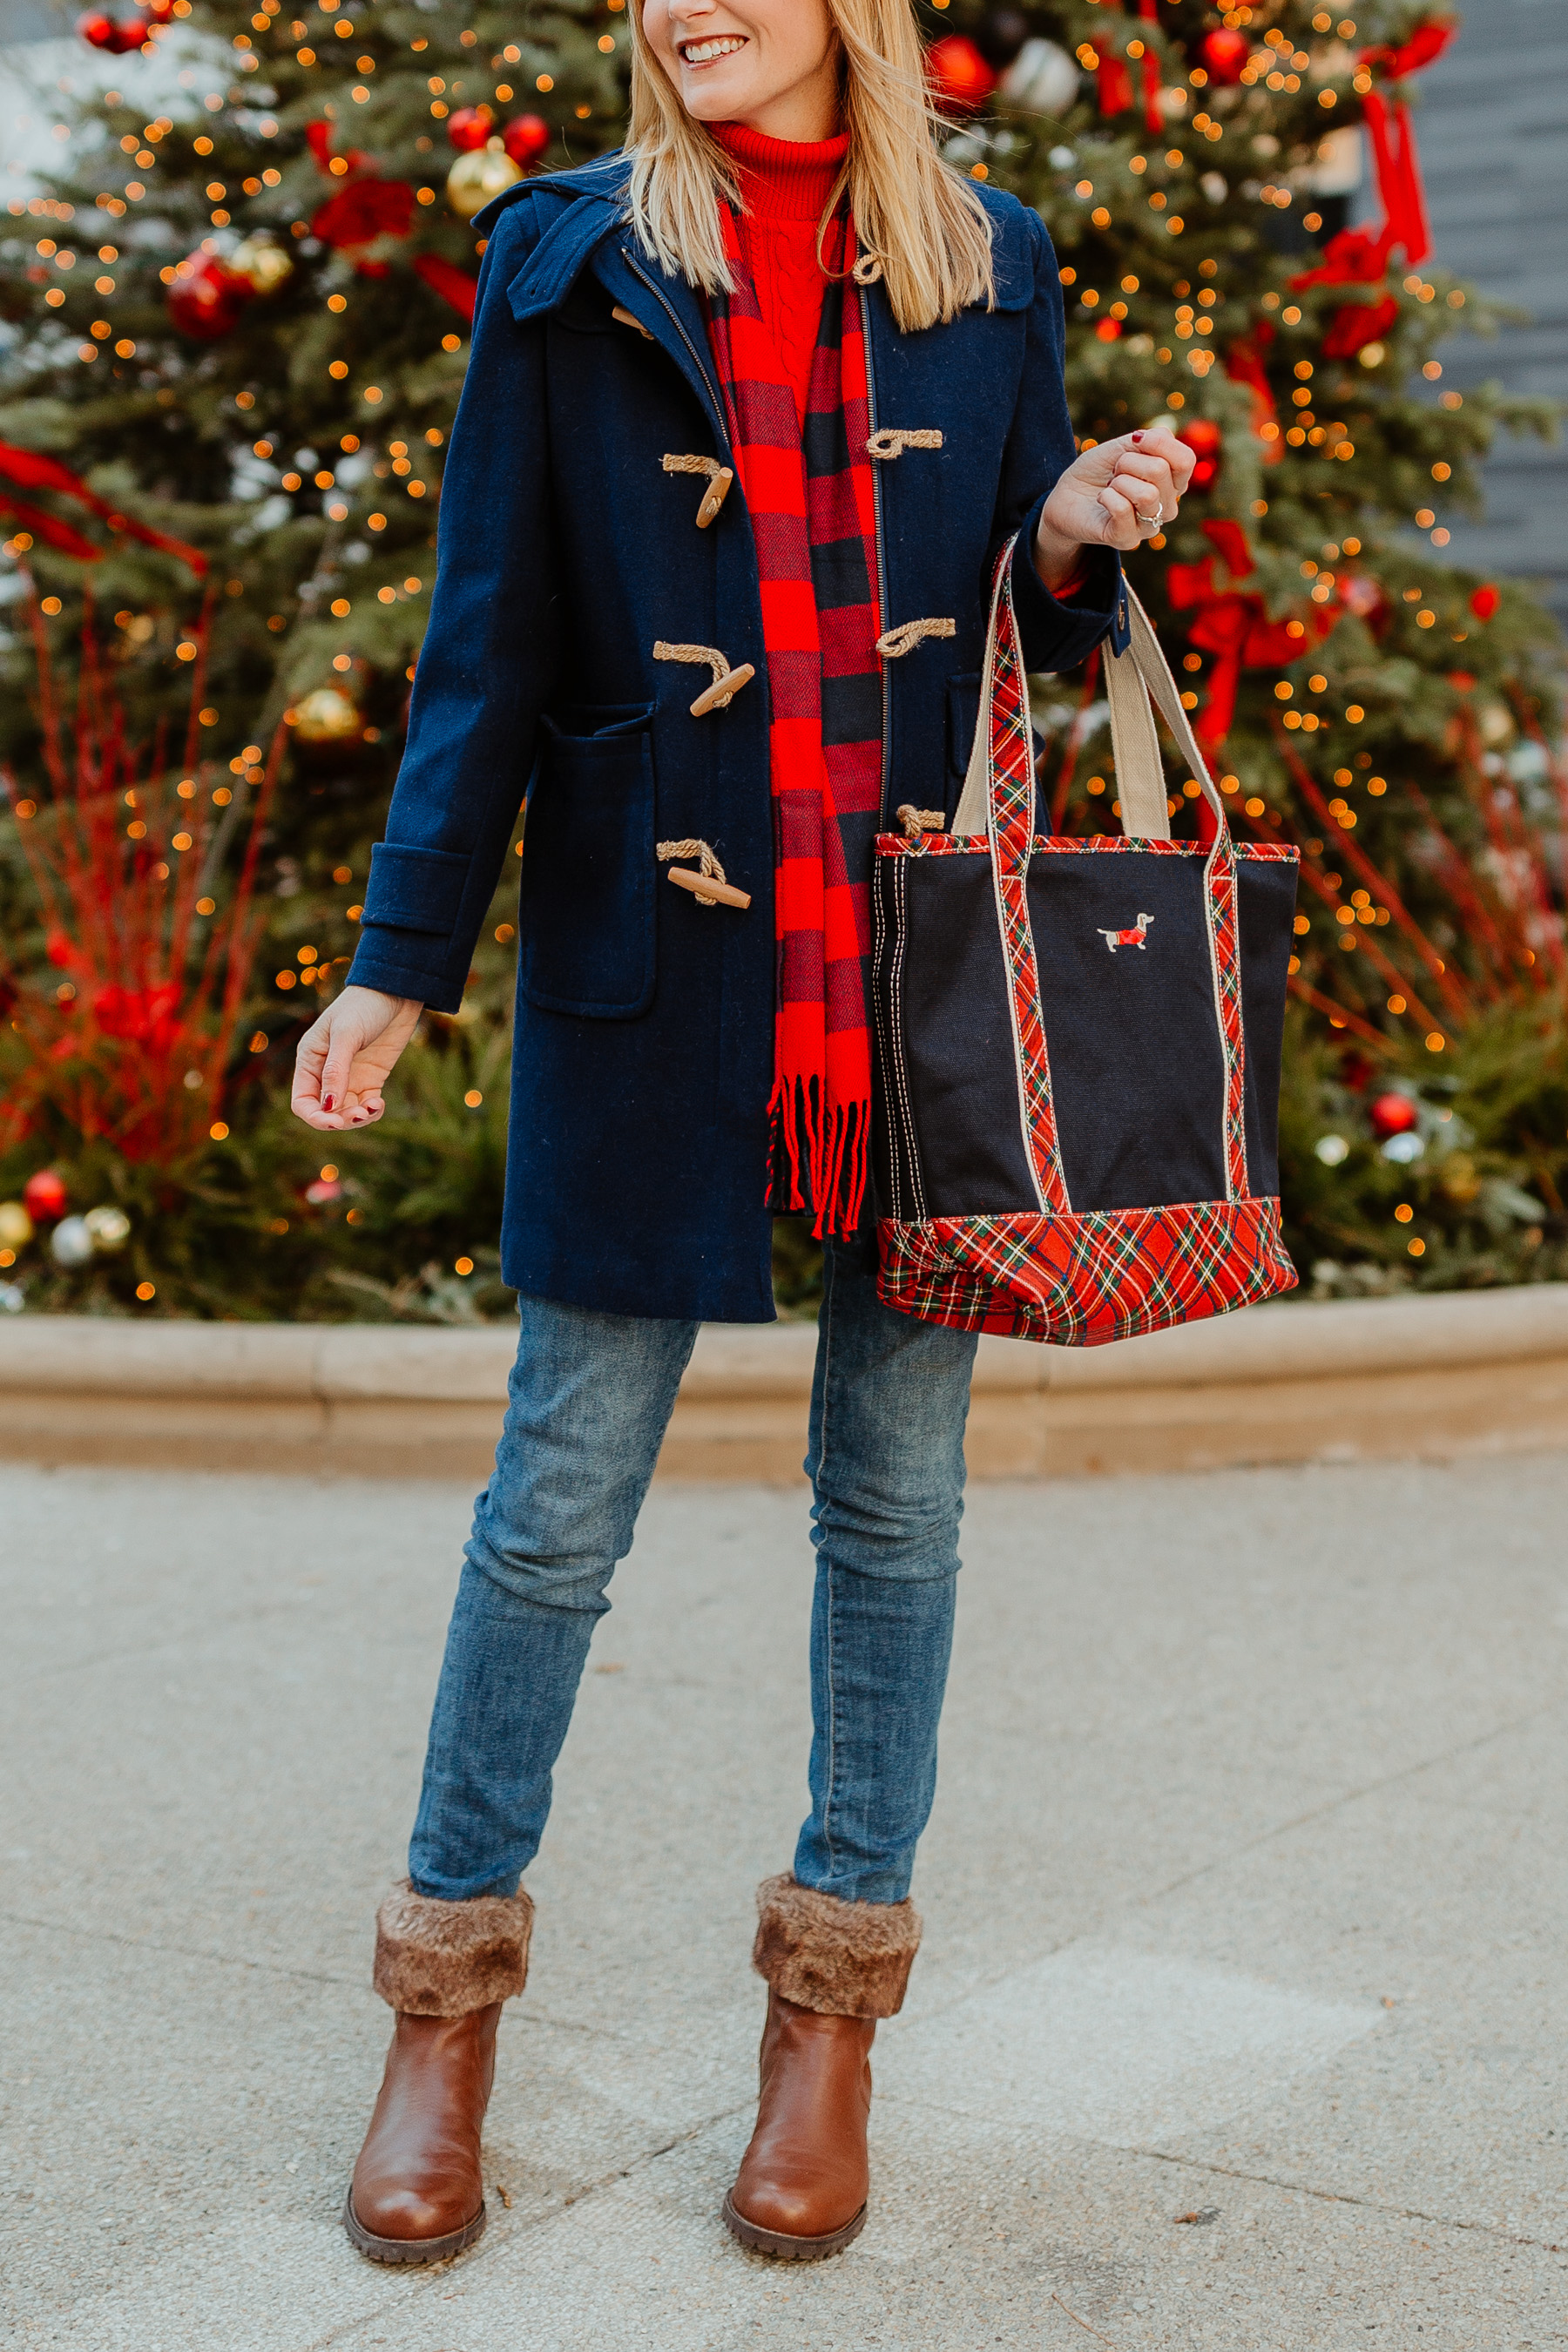 Navy Duffle Coat (On sale!)/ Cable-Knit Turtleneck Sweater / Fur Booties / Buffalo Plaid Scarf / Lands’ End Plaid Dachshund Tote c/o / Skinny Jeans (I’m wearing the maternity version, though.) - Kelly Larkin